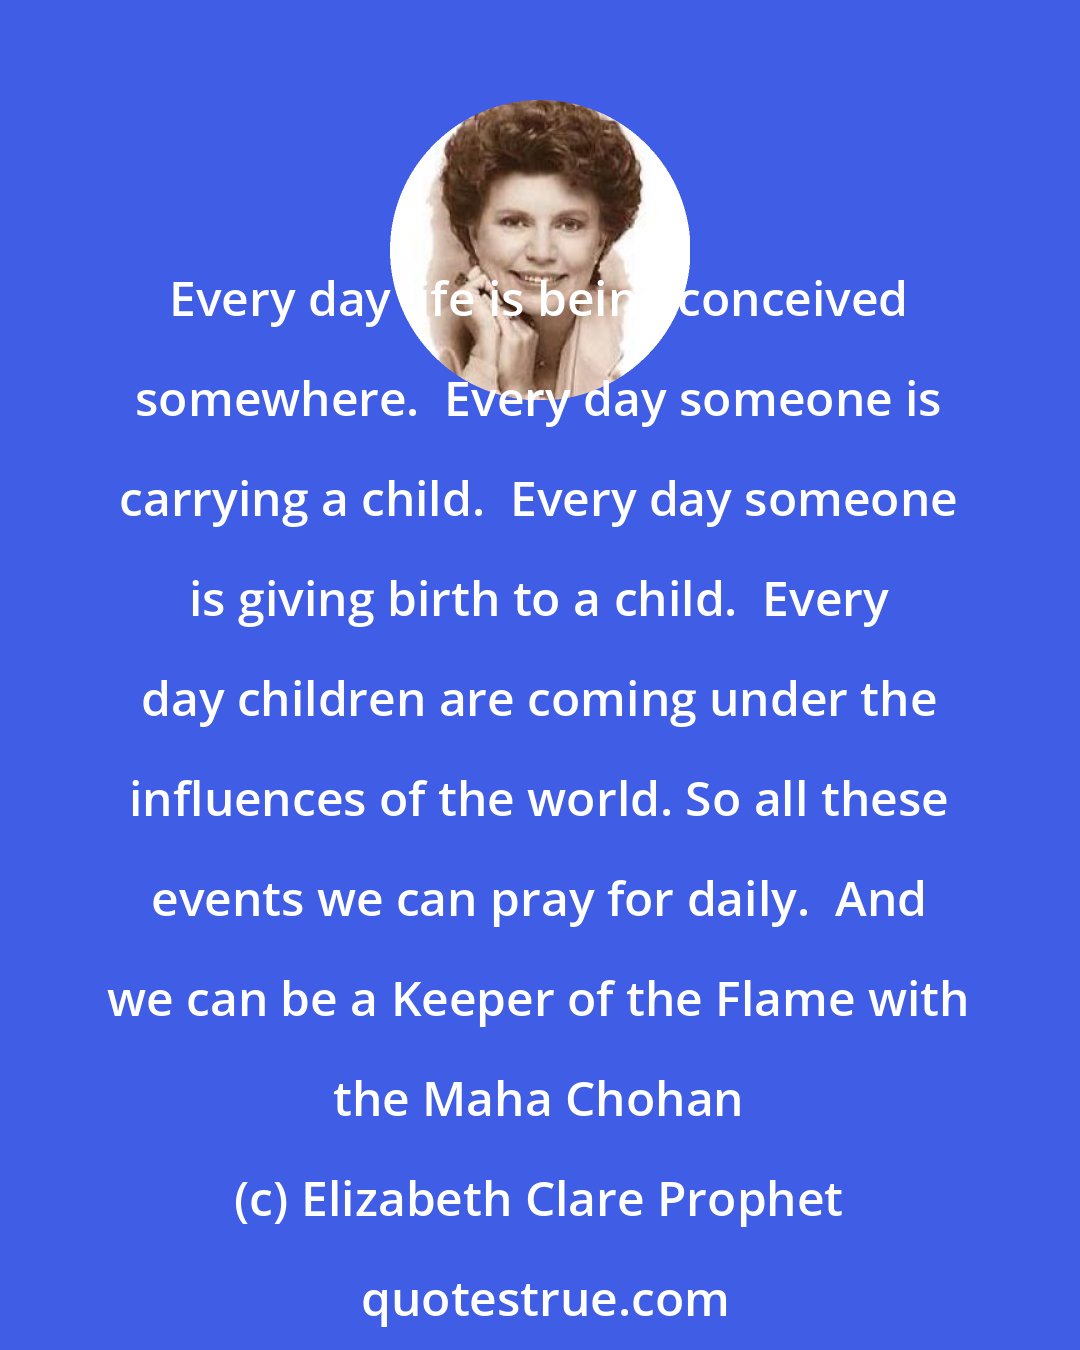 Elizabeth Clare Prophet: Every day life is being conceived somewhere.  Every day someone is carrying a child.  Every day someone is giving birth to a child.  Every day children are coming under the influences of the world. So all these events we can pray for daily.  And we can be a Keeper of the Flame with the Maha Chohan